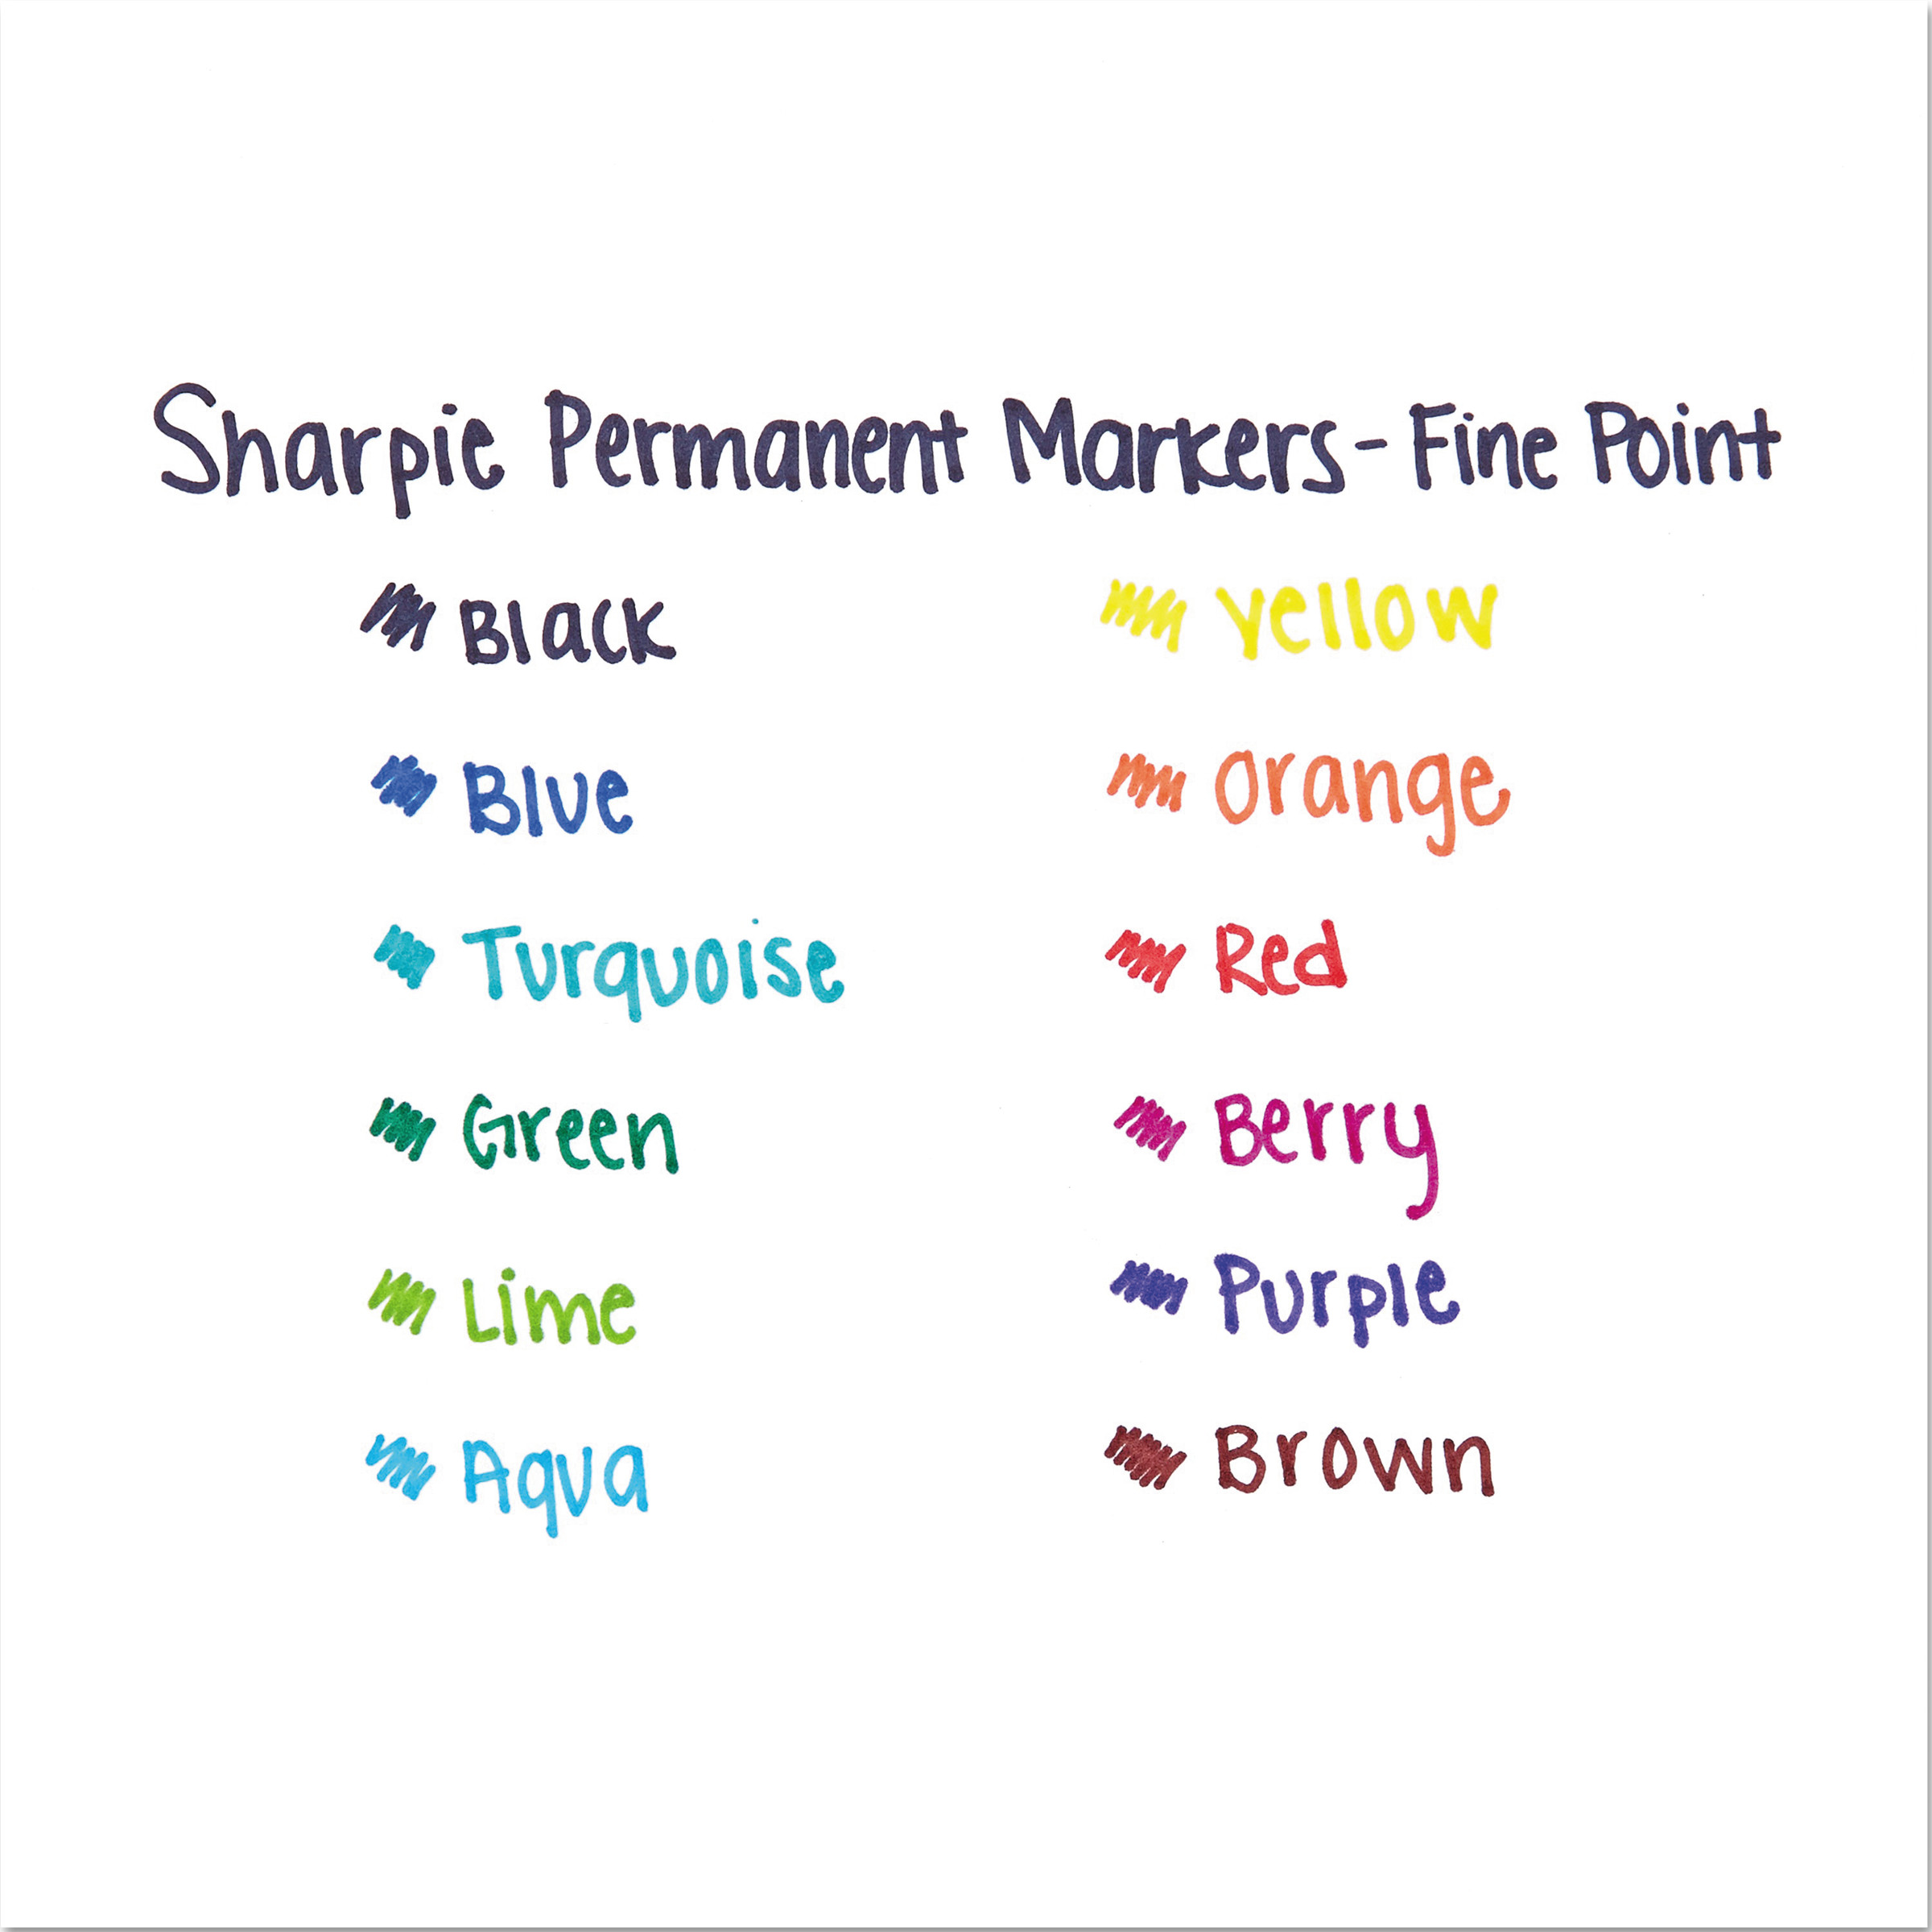 Sharpie Permanent Markers, Fine Point, Black, 12 Count - image 5 of 8